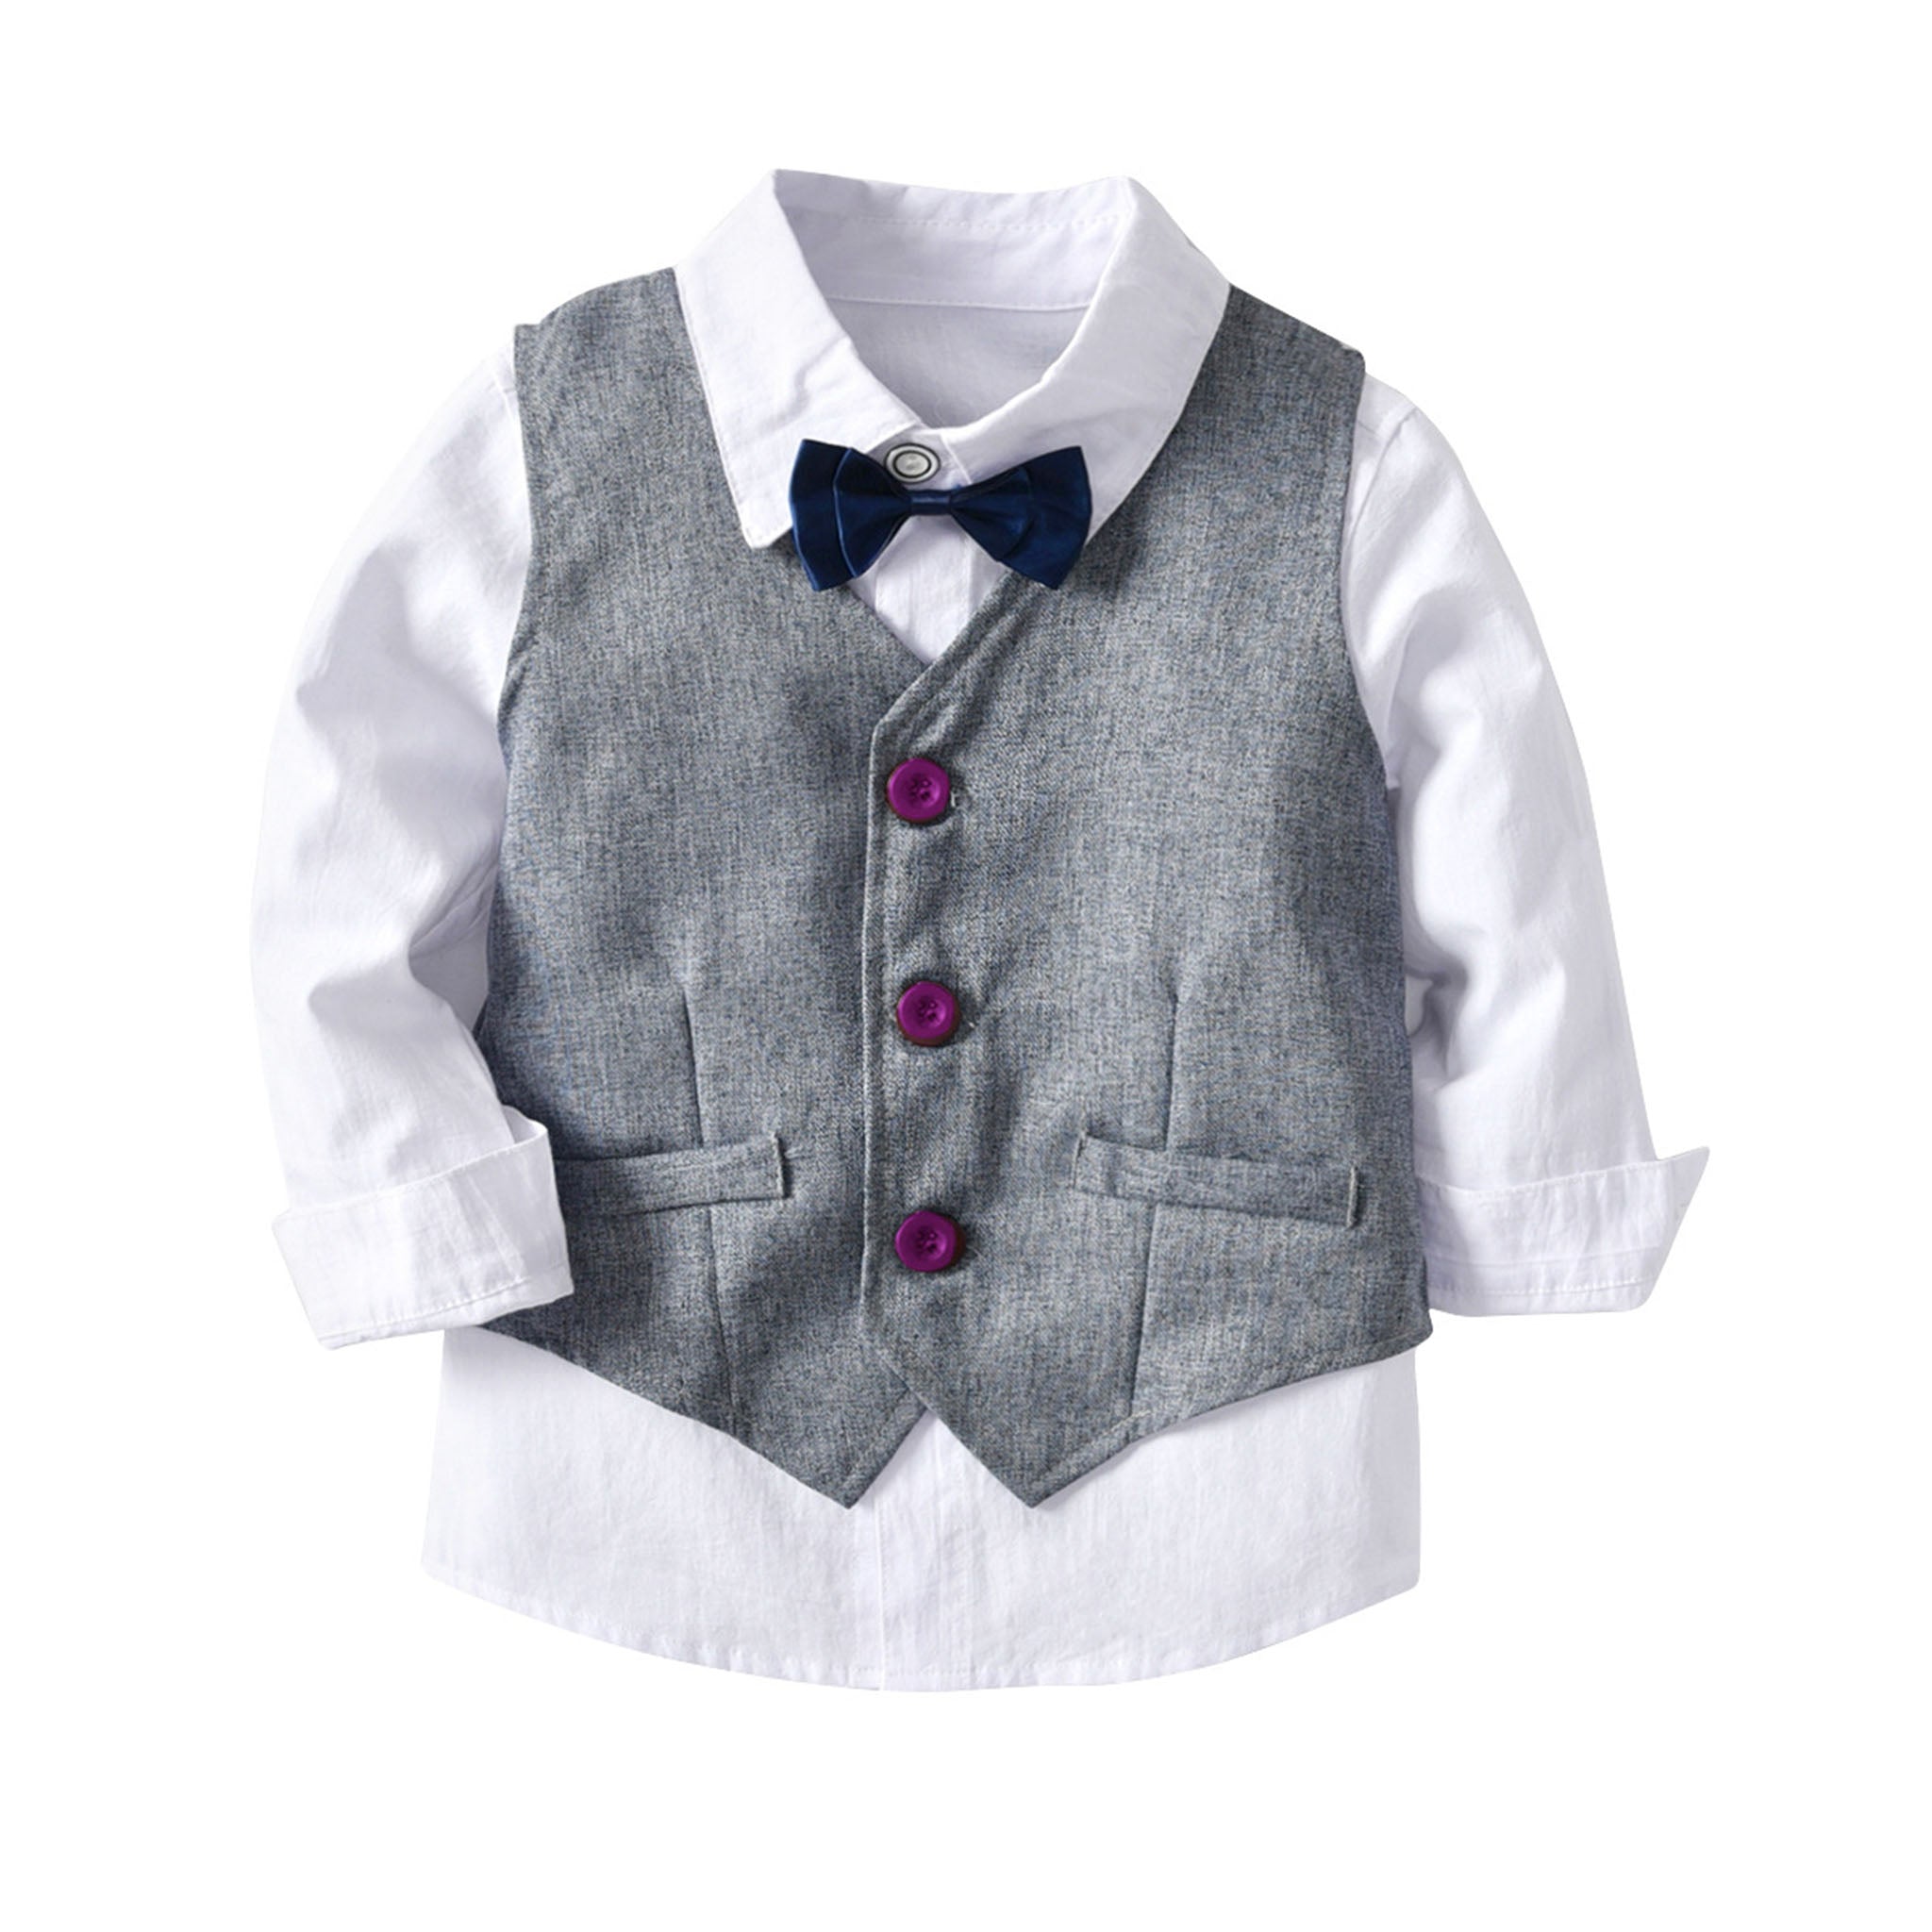 Boy's Four-piece Long-sleeved Shirt and Gray Vest and Trousers